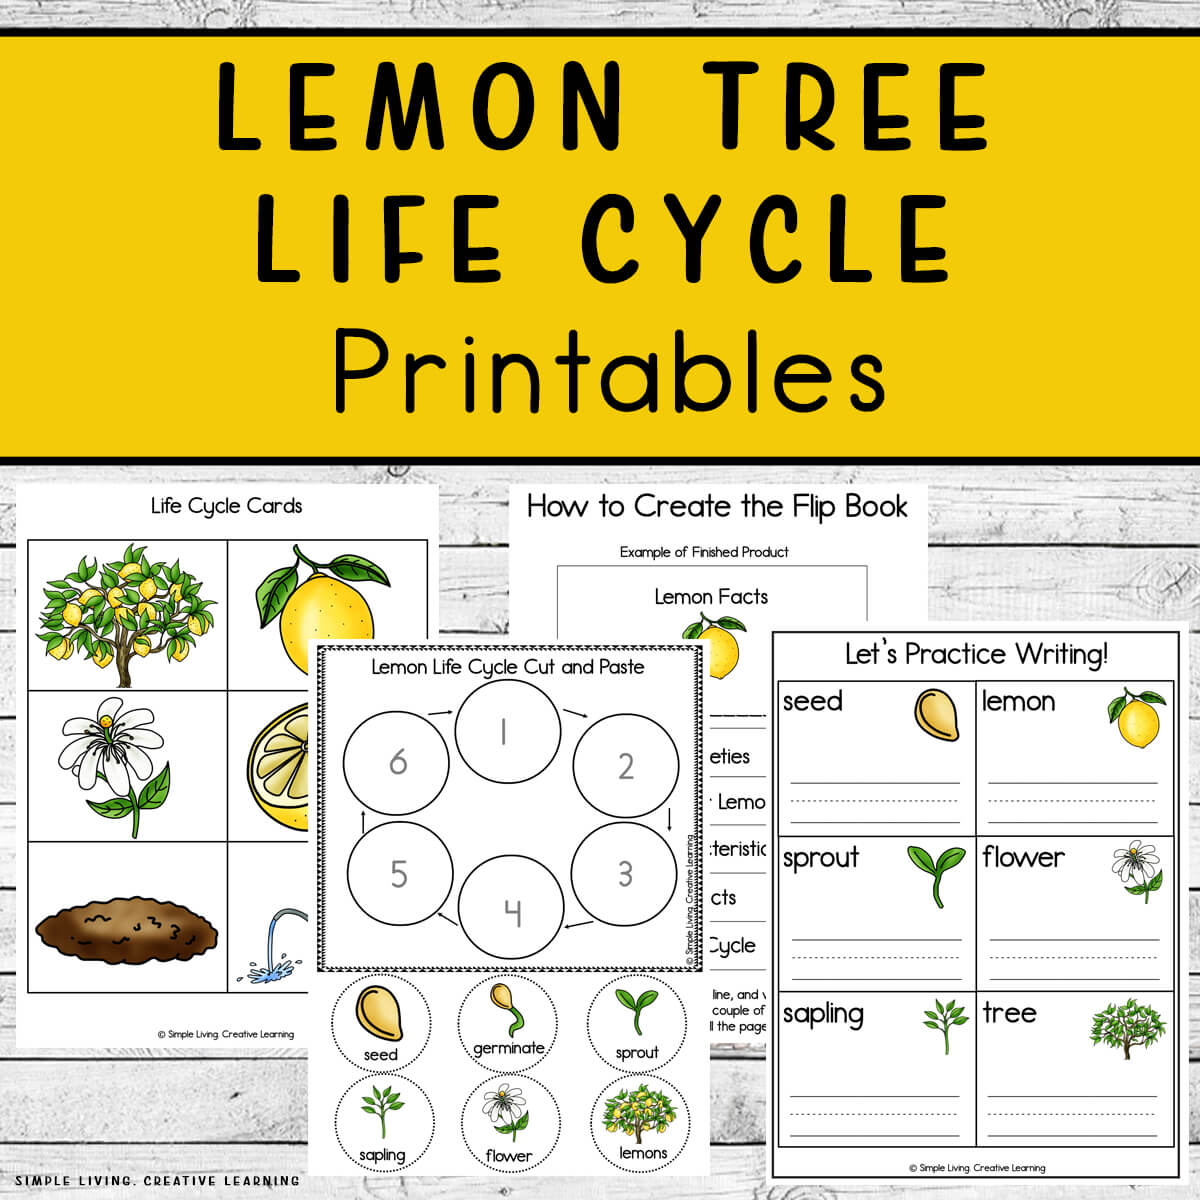 Lemon Tree Life Cycle Printables four pages